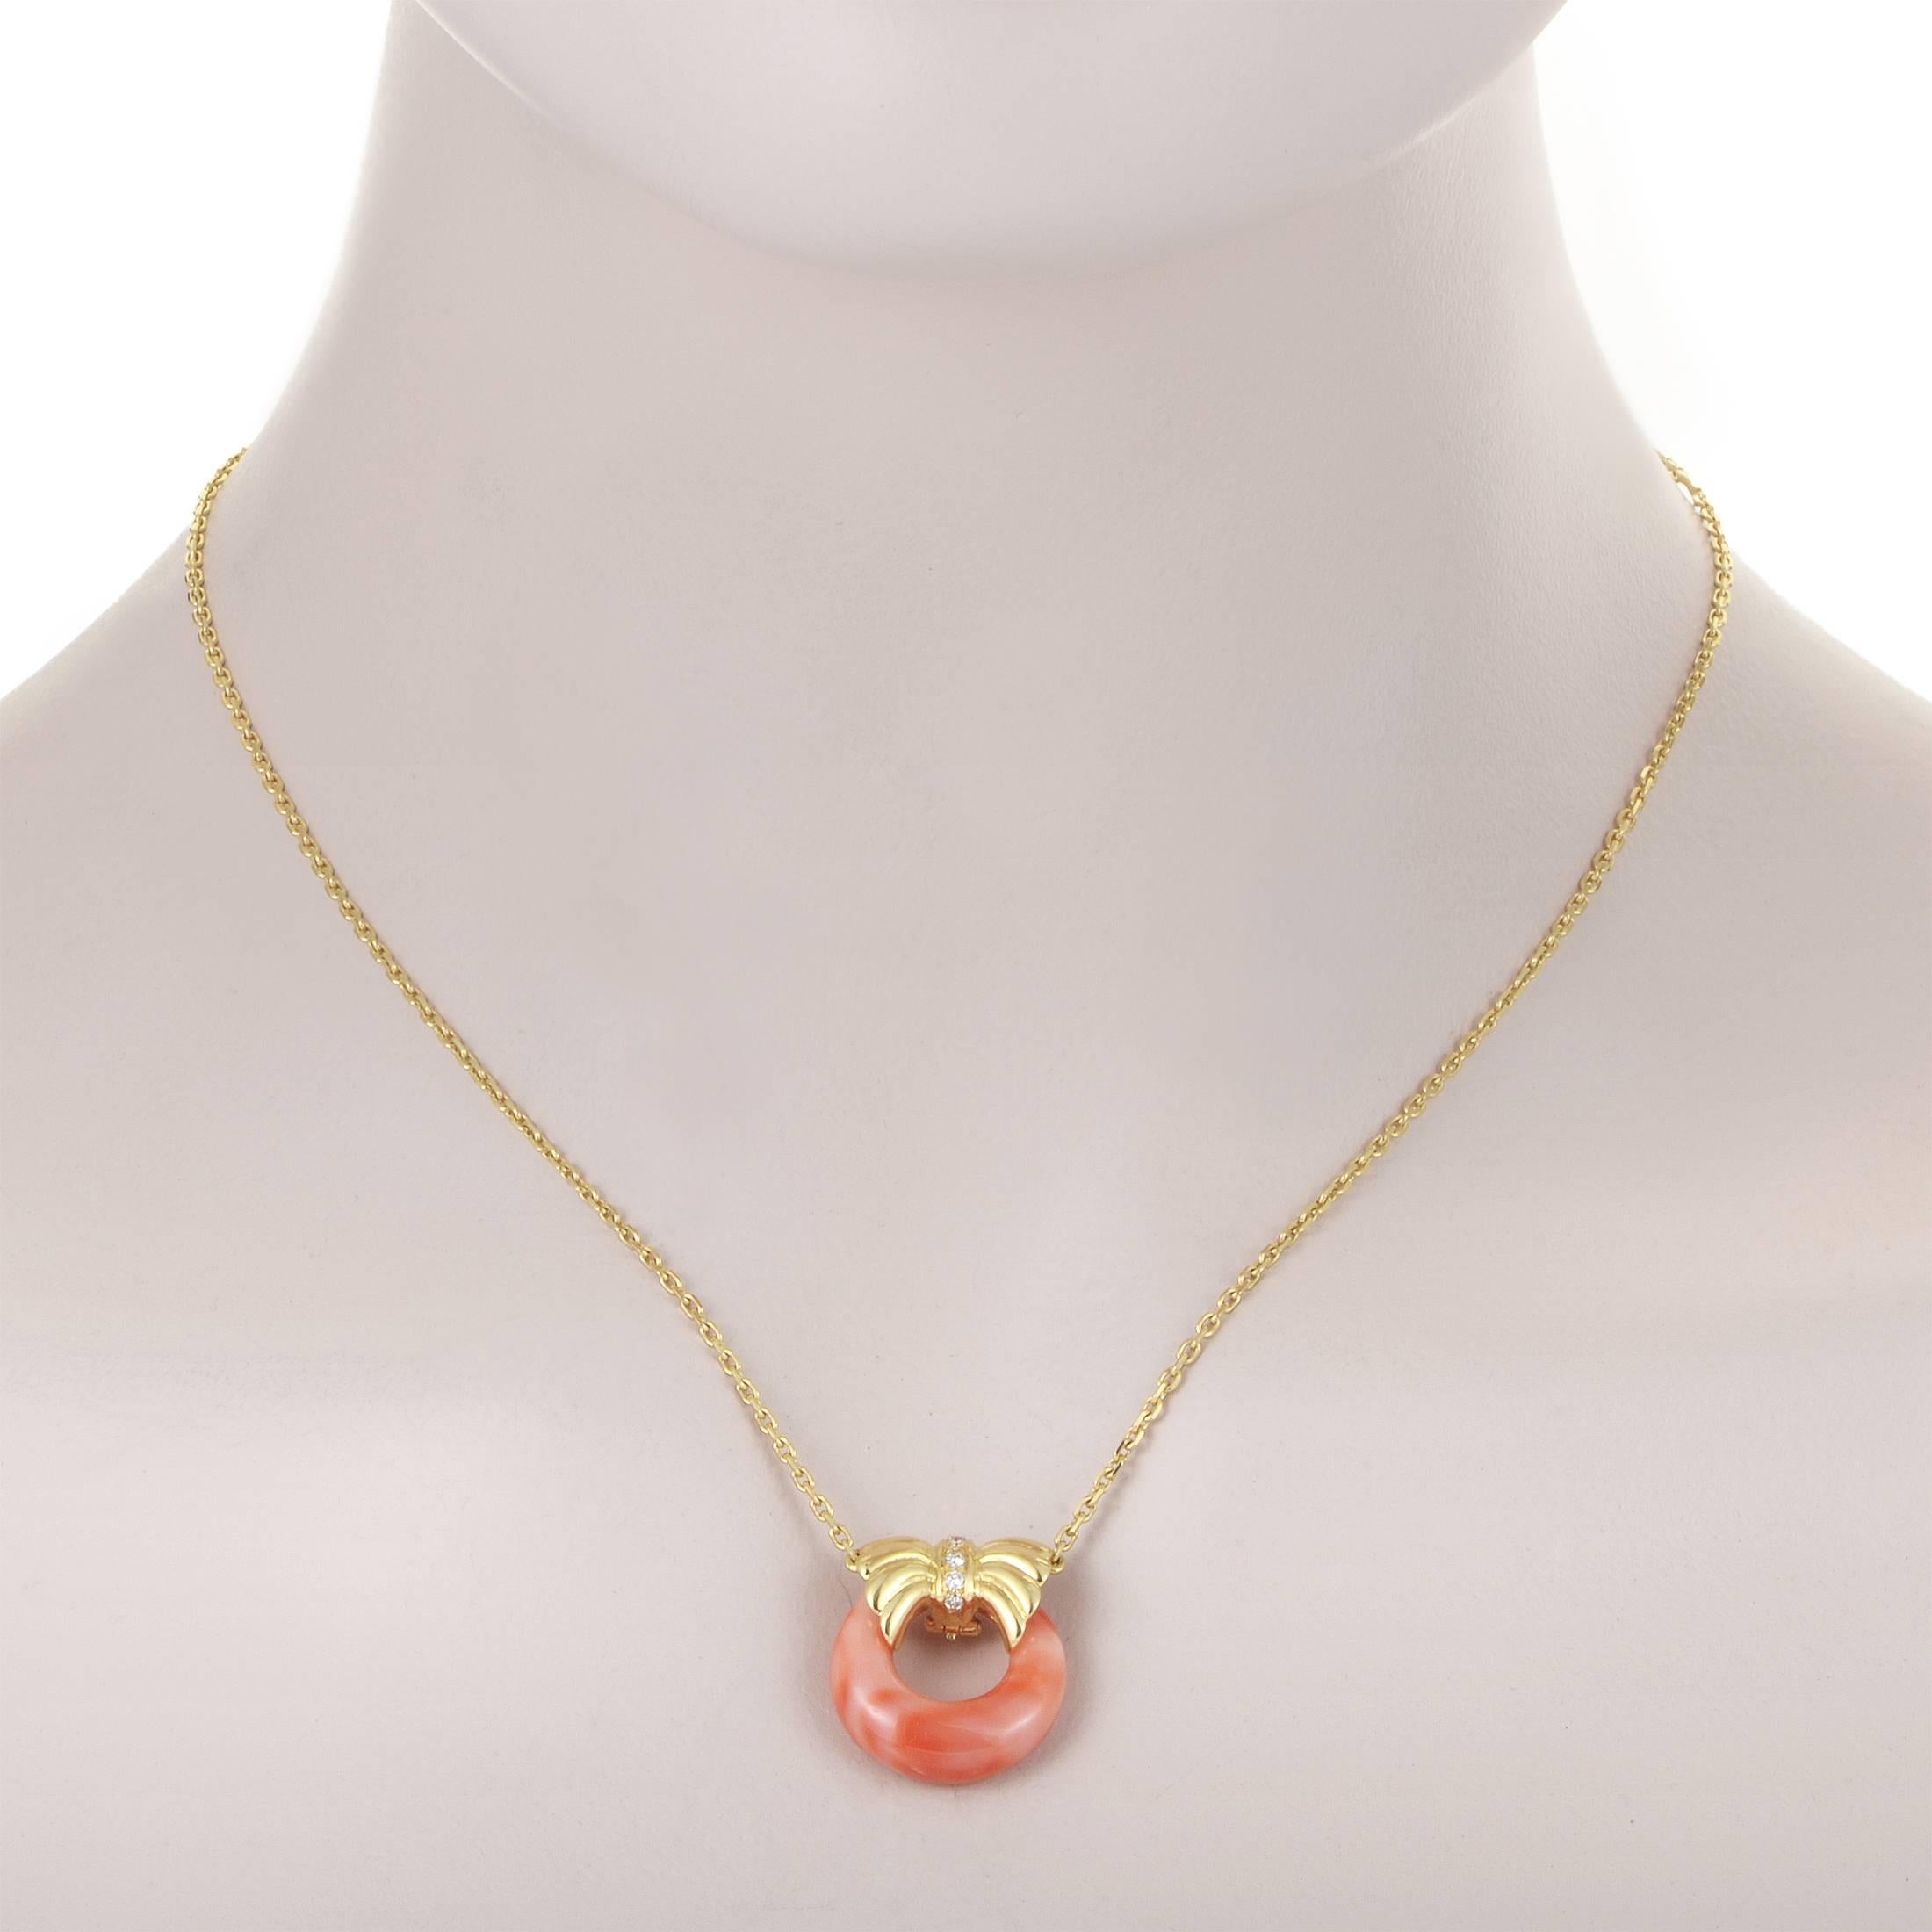 Embracing the smooth shape of the marvelous coral stone with its brilliantly designed and immaculately crafted form of a bow, the radiant 18K yellow gold in the pendant of this fabulous necklace from Van Cleef & Arpels is adorned with delicately